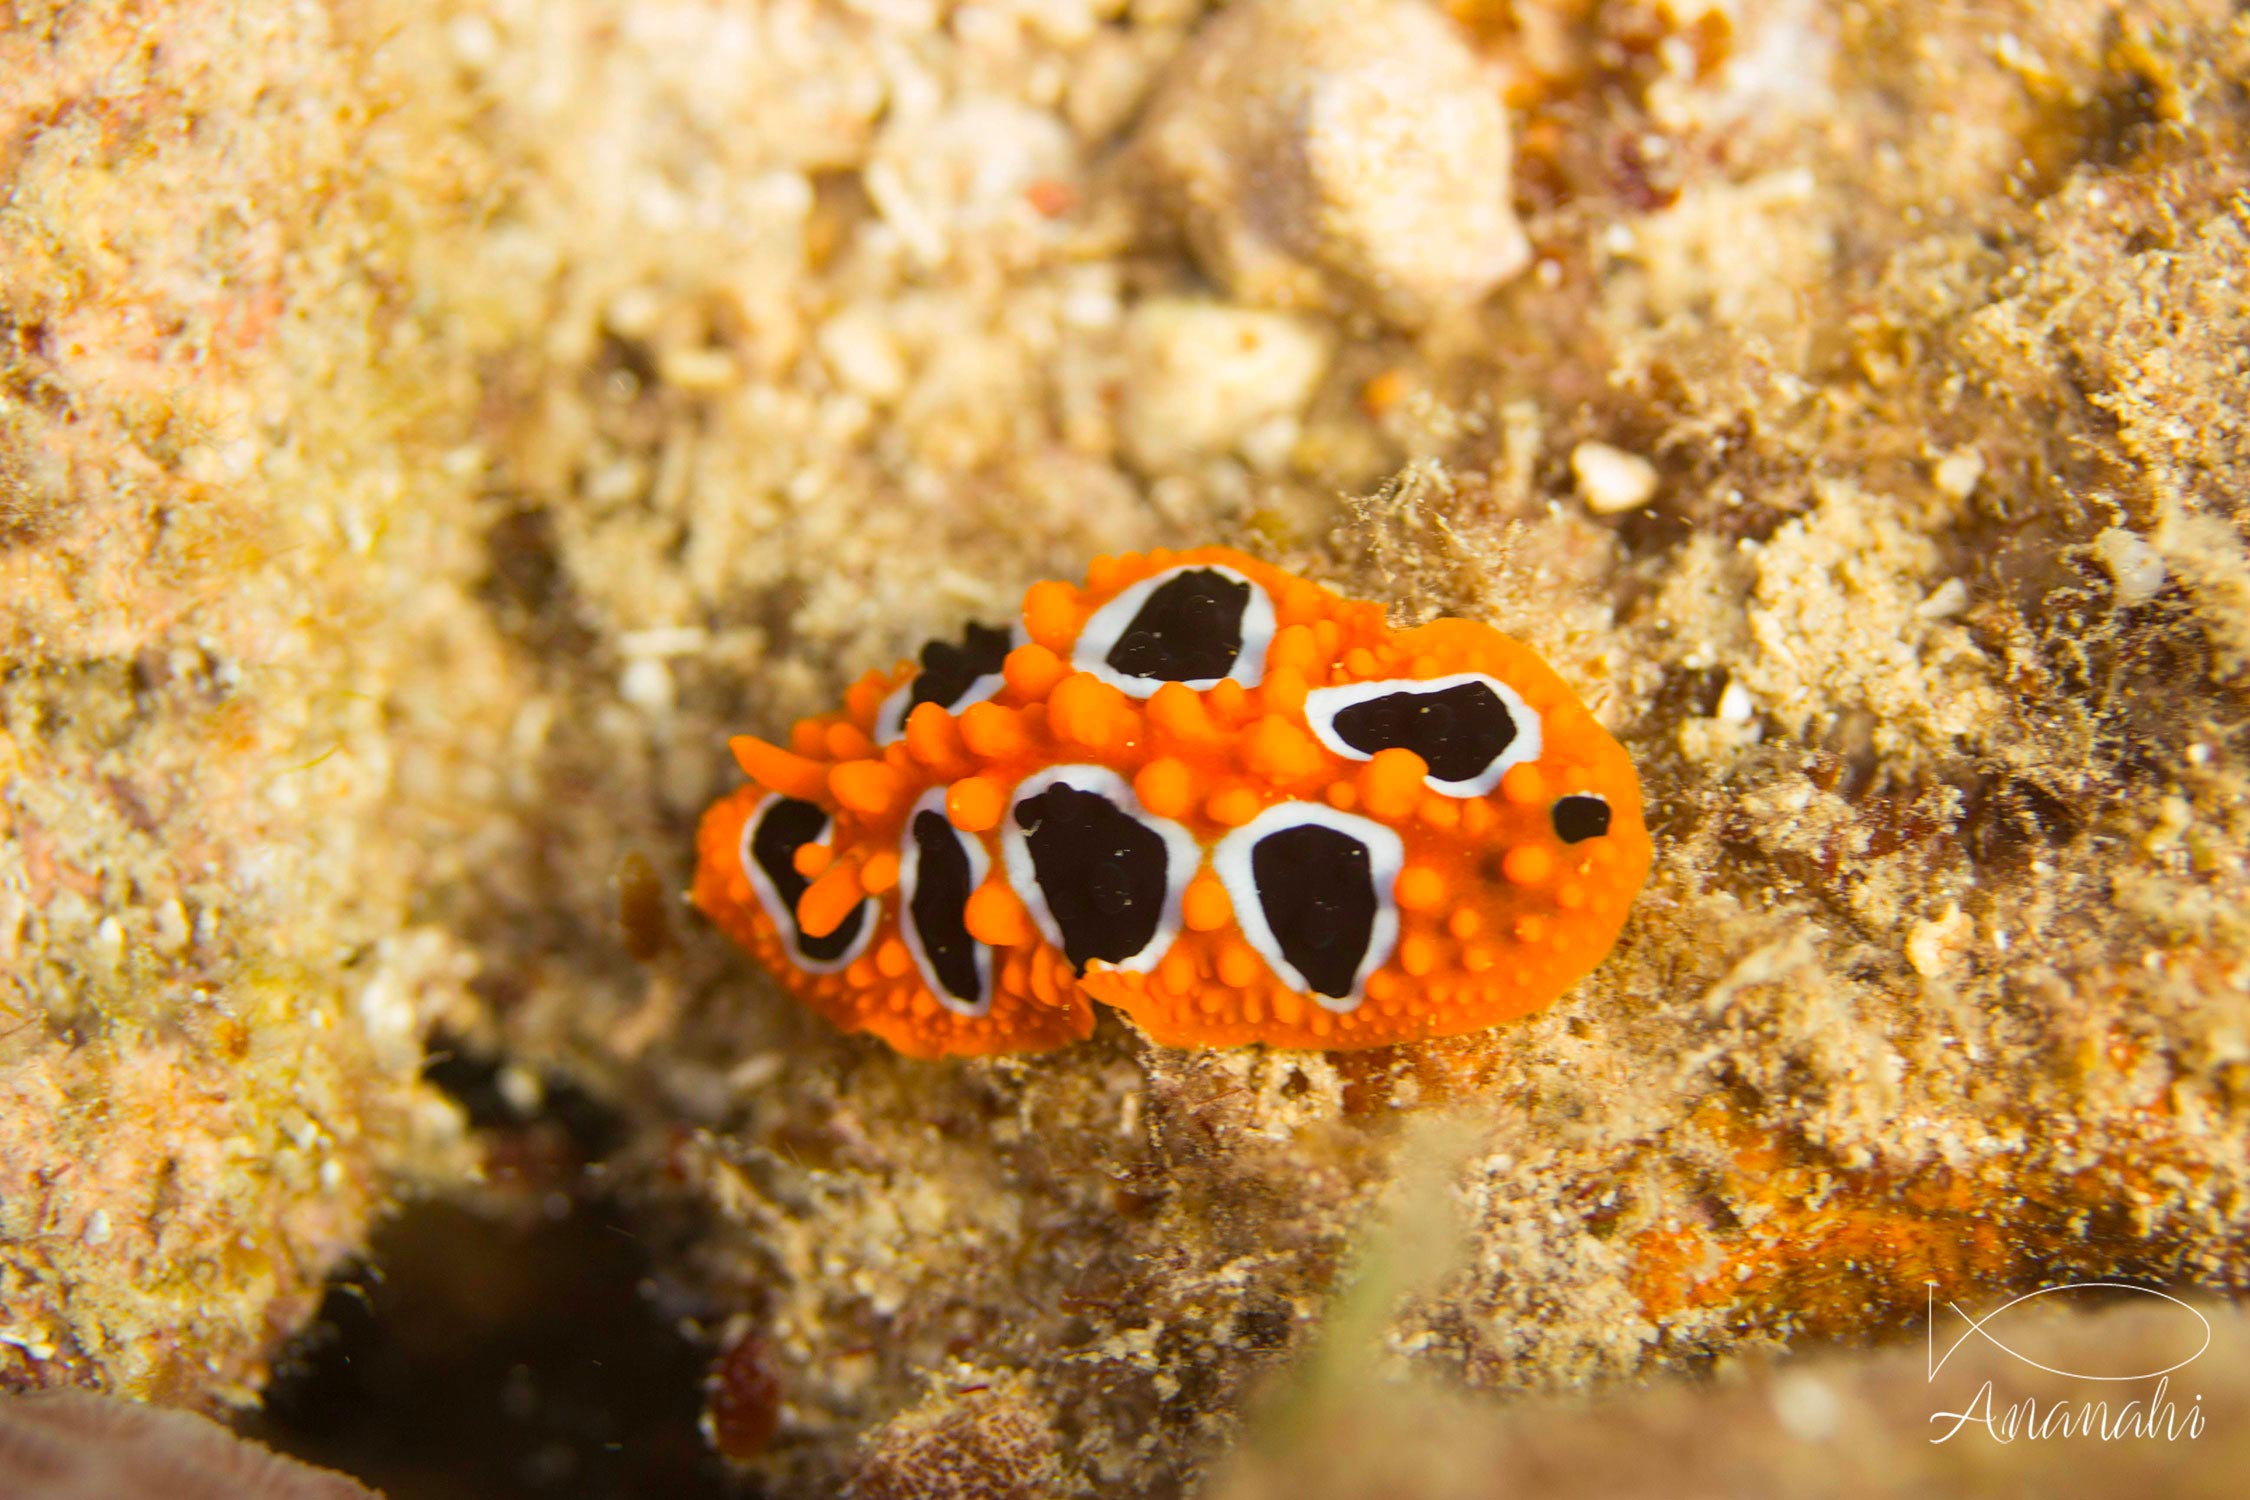 Ocellated phyllidia of Mayotte